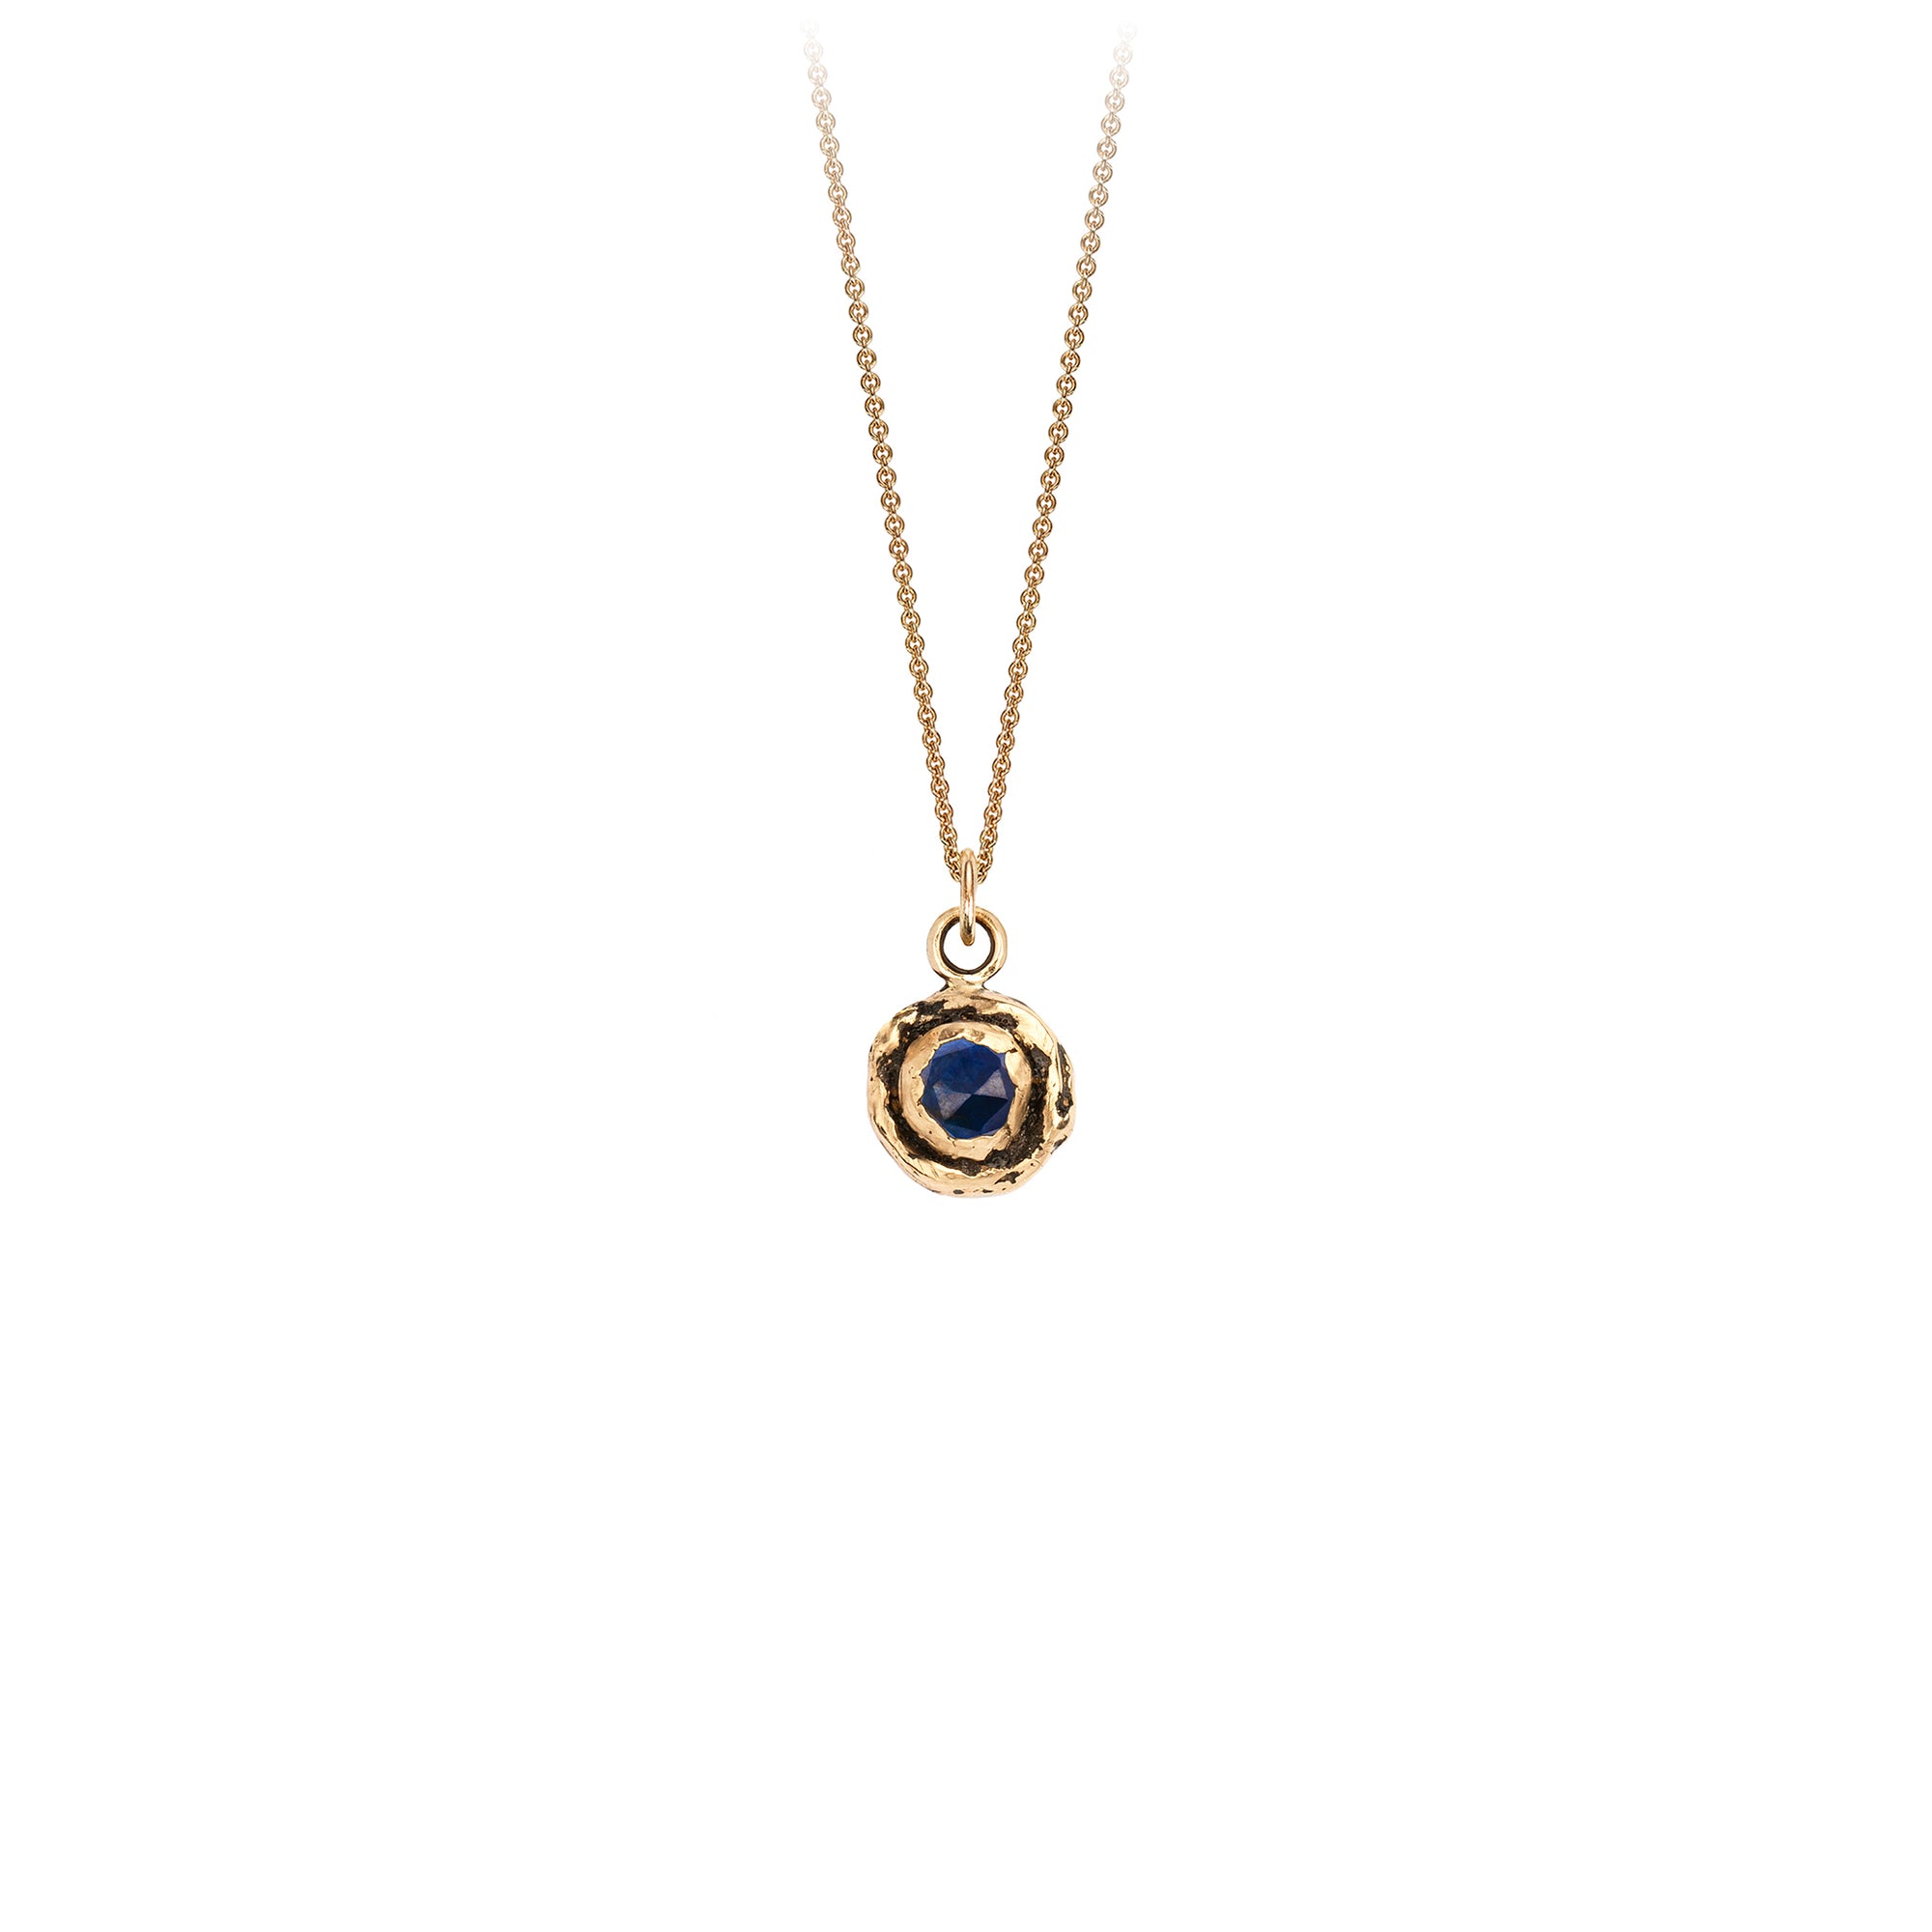 A 14k gold chain featuring a small 14k gold faceted sapphire.